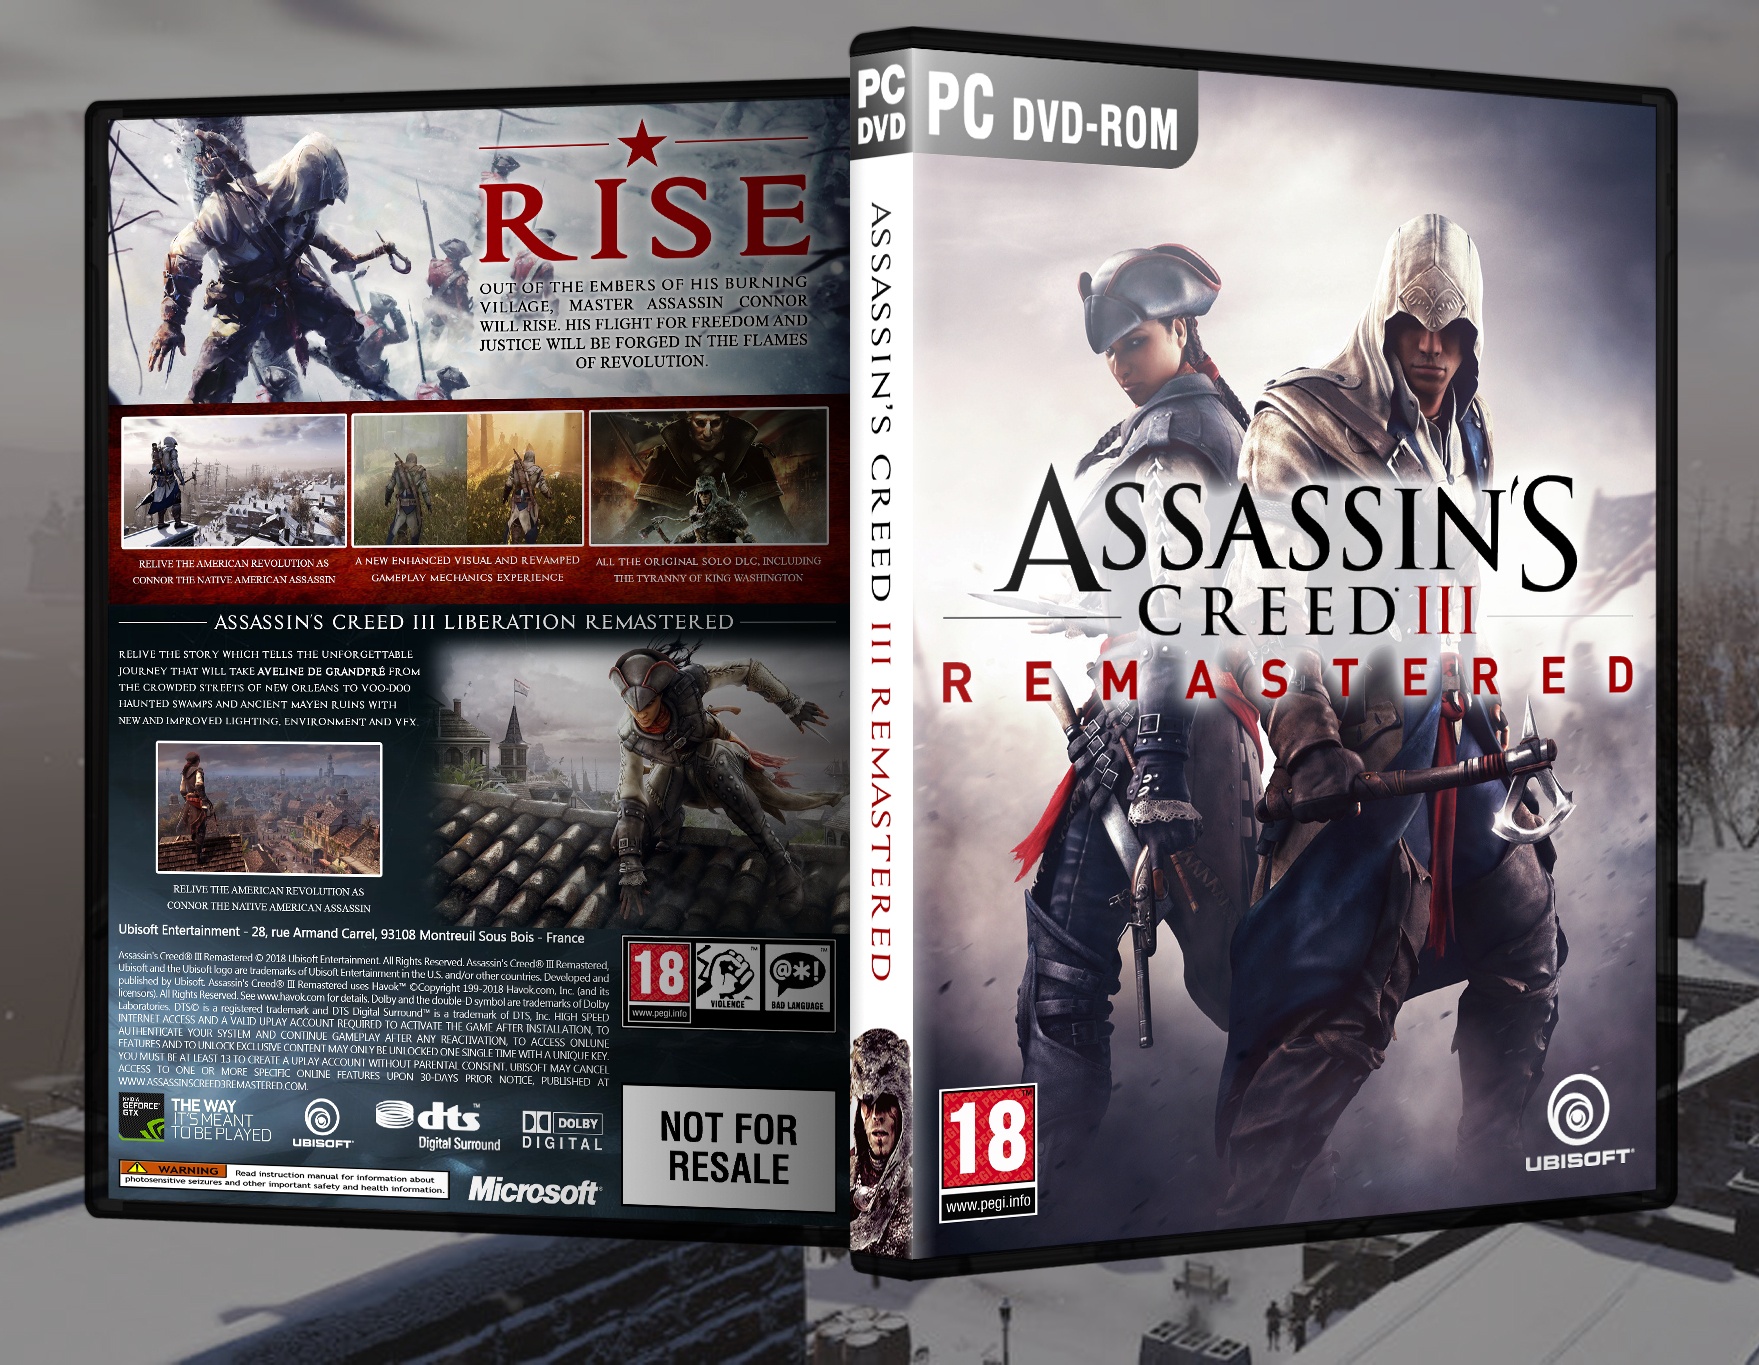 Assassin's Creed III Remastered box cover